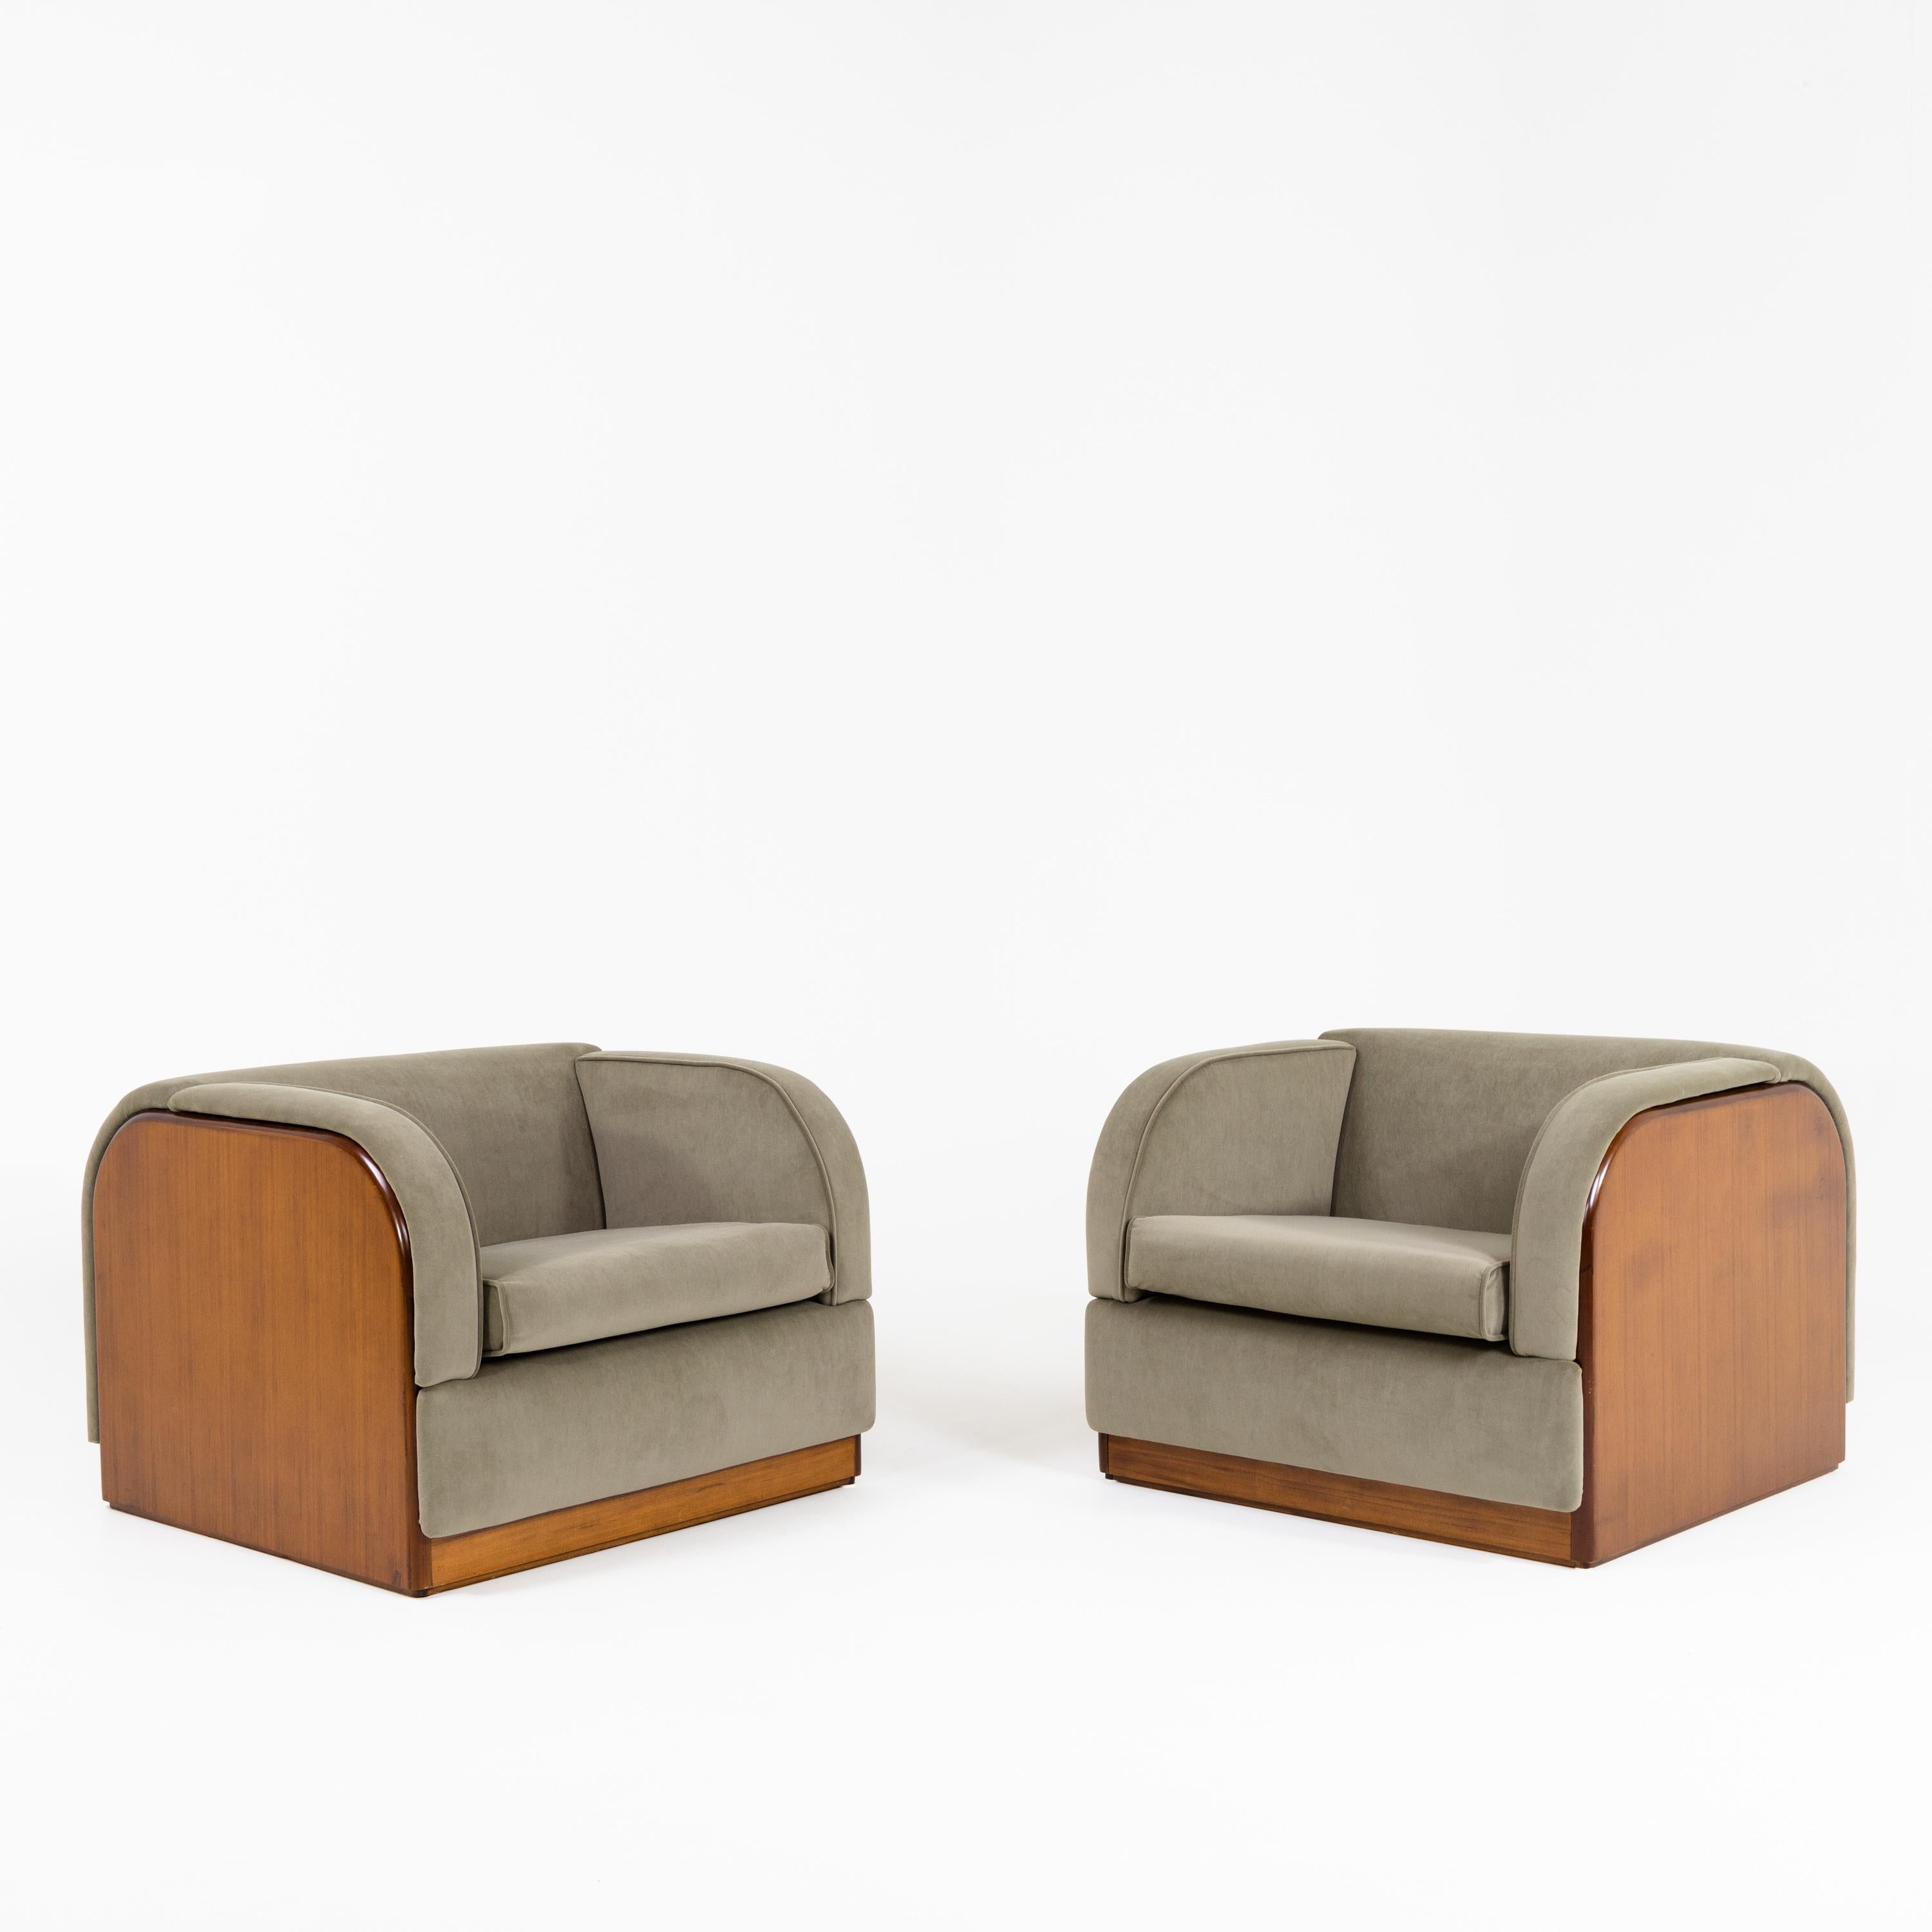 Italian Modernist Lounge Chairs, Probably Italy, 1940s